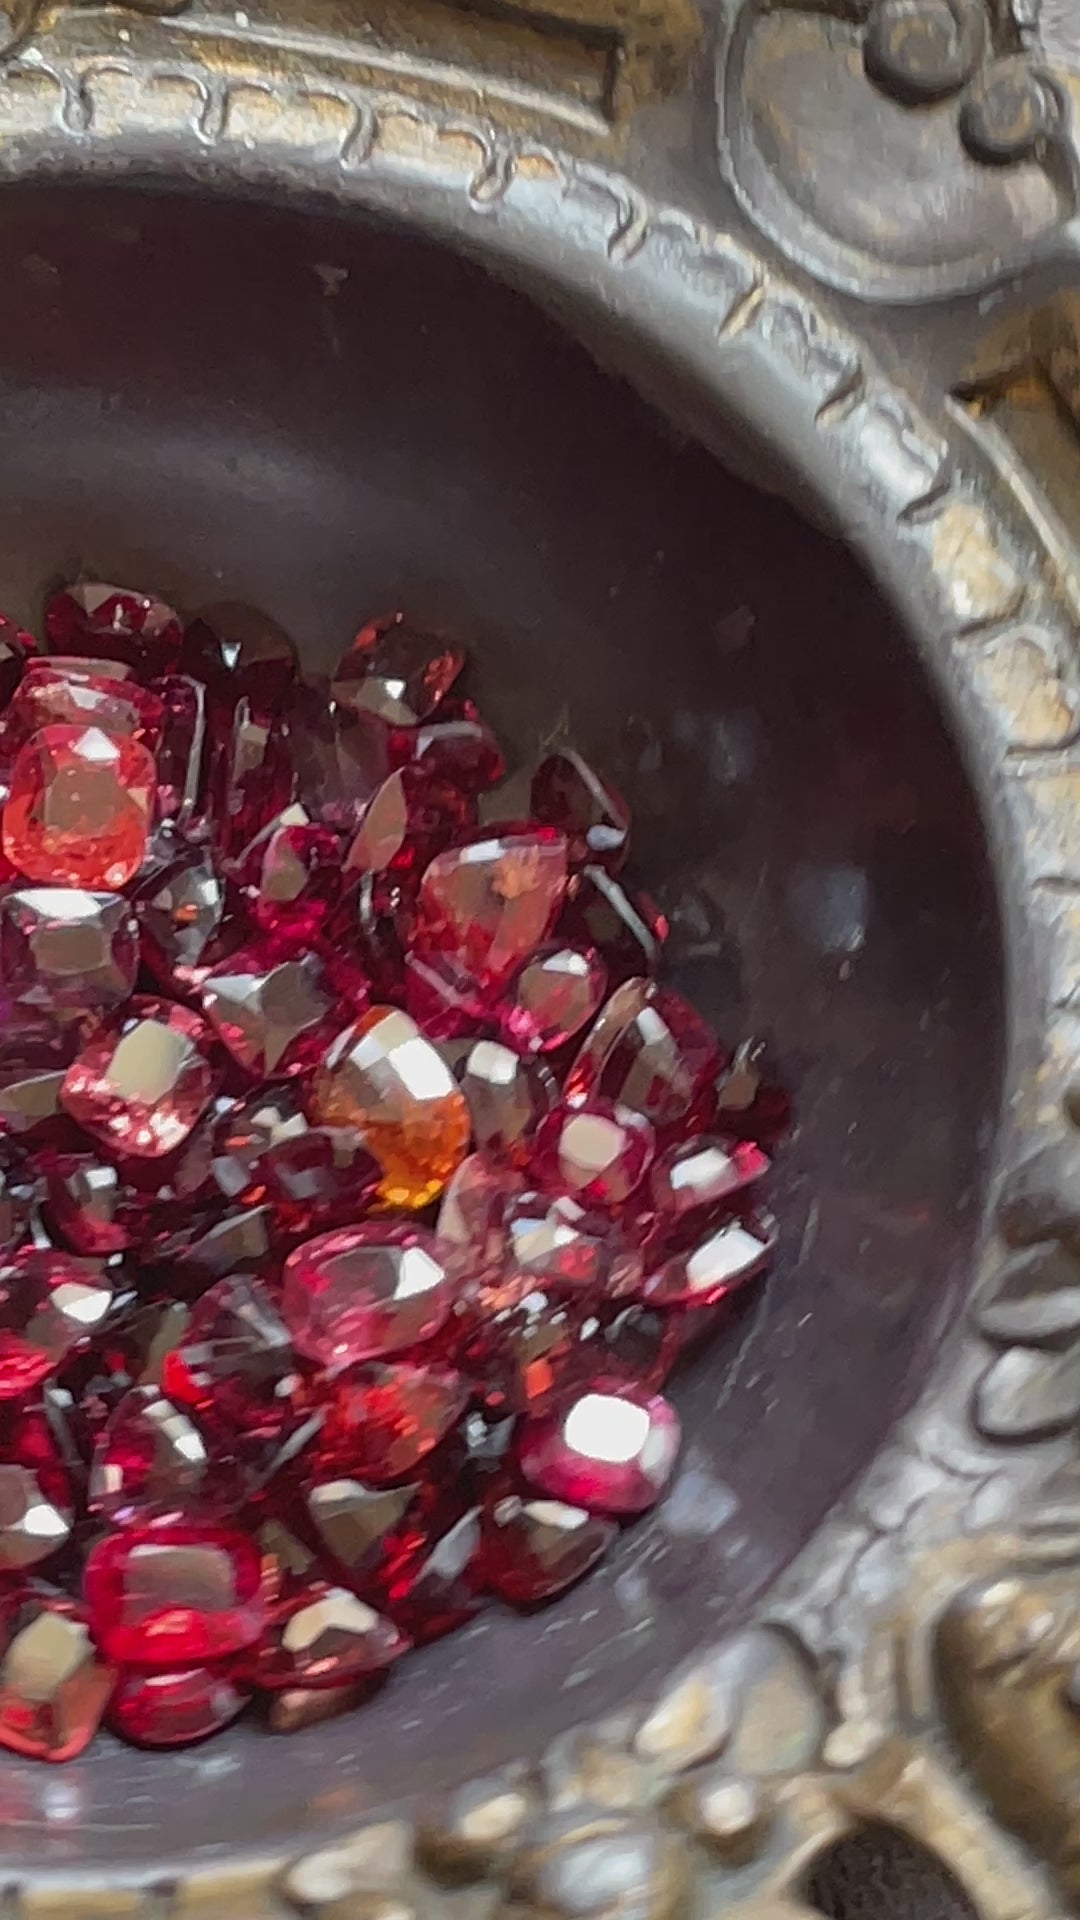 Captivating unheated spinels from the Jogani collection in fiery shades